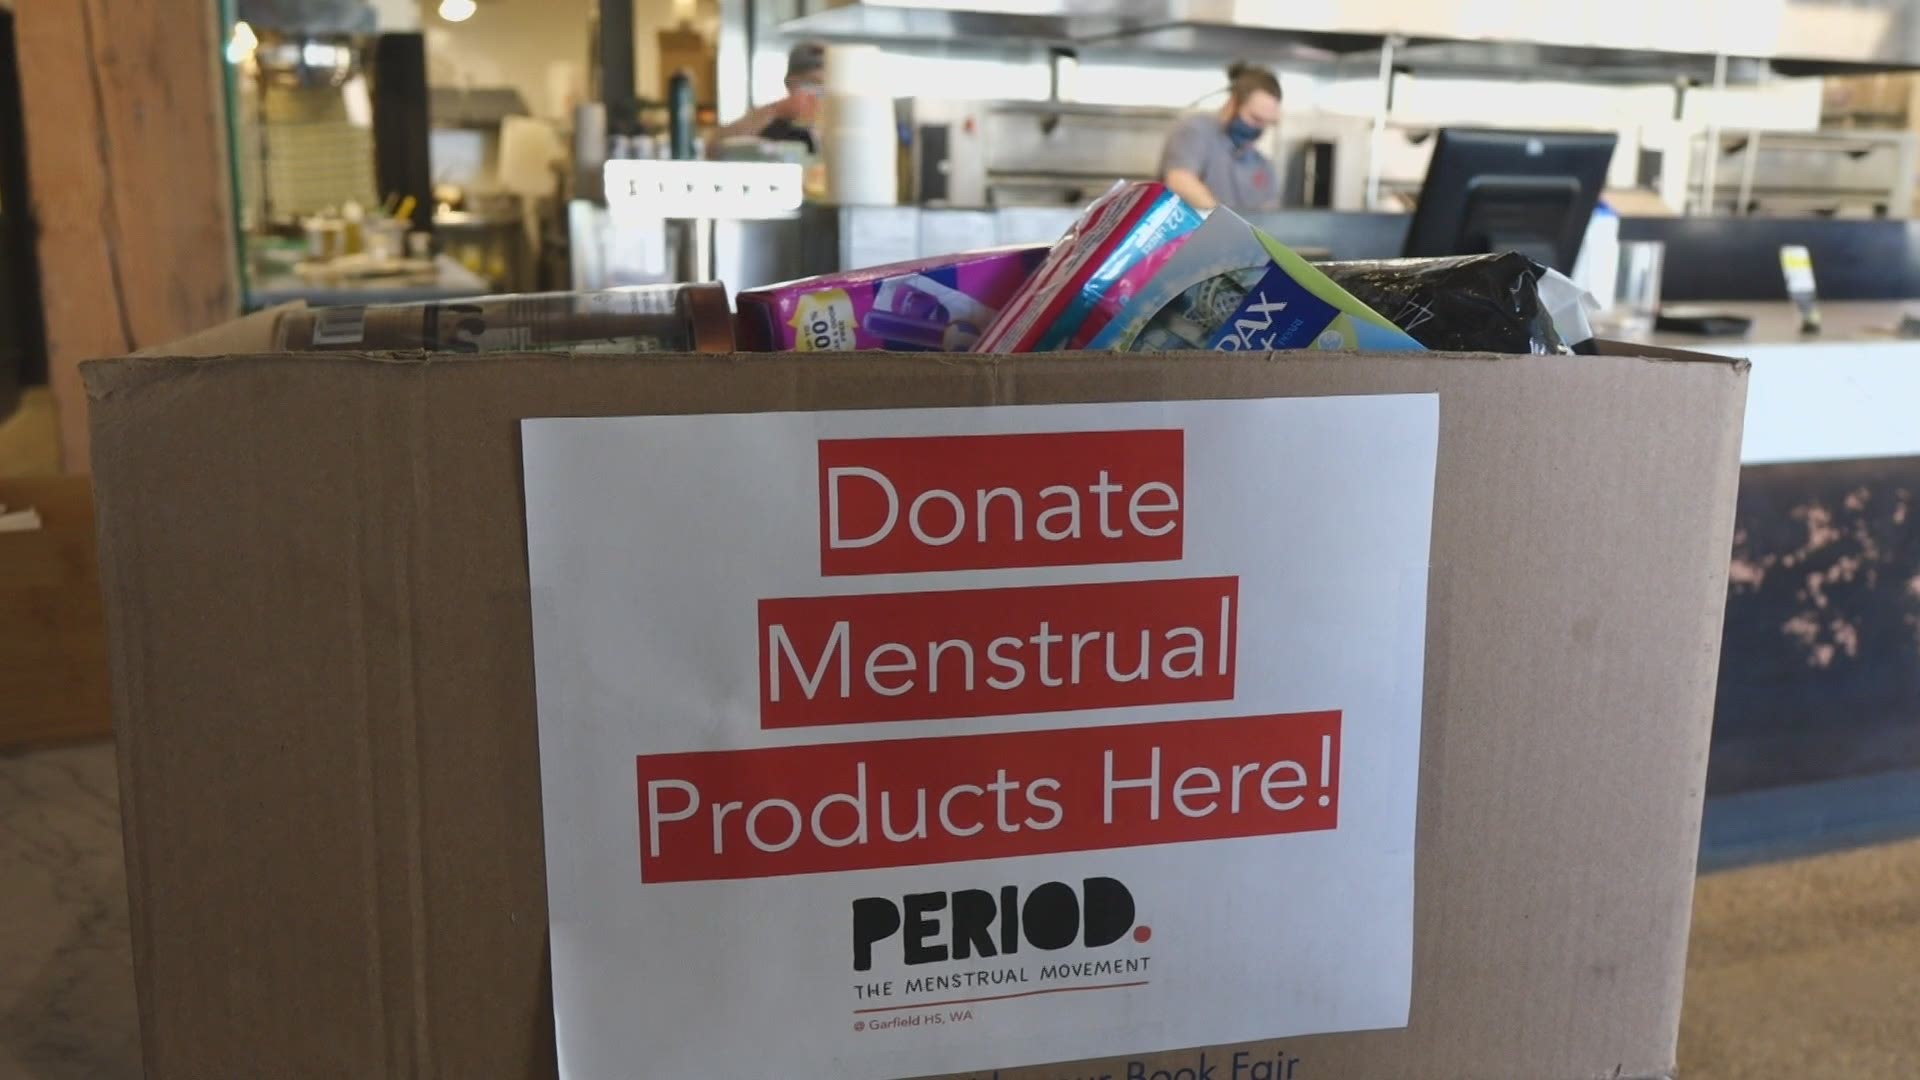 The "Menstruation Movement" is part of a national movement to end period poverty through education, service and advocacy. Donations can be made through May 2.